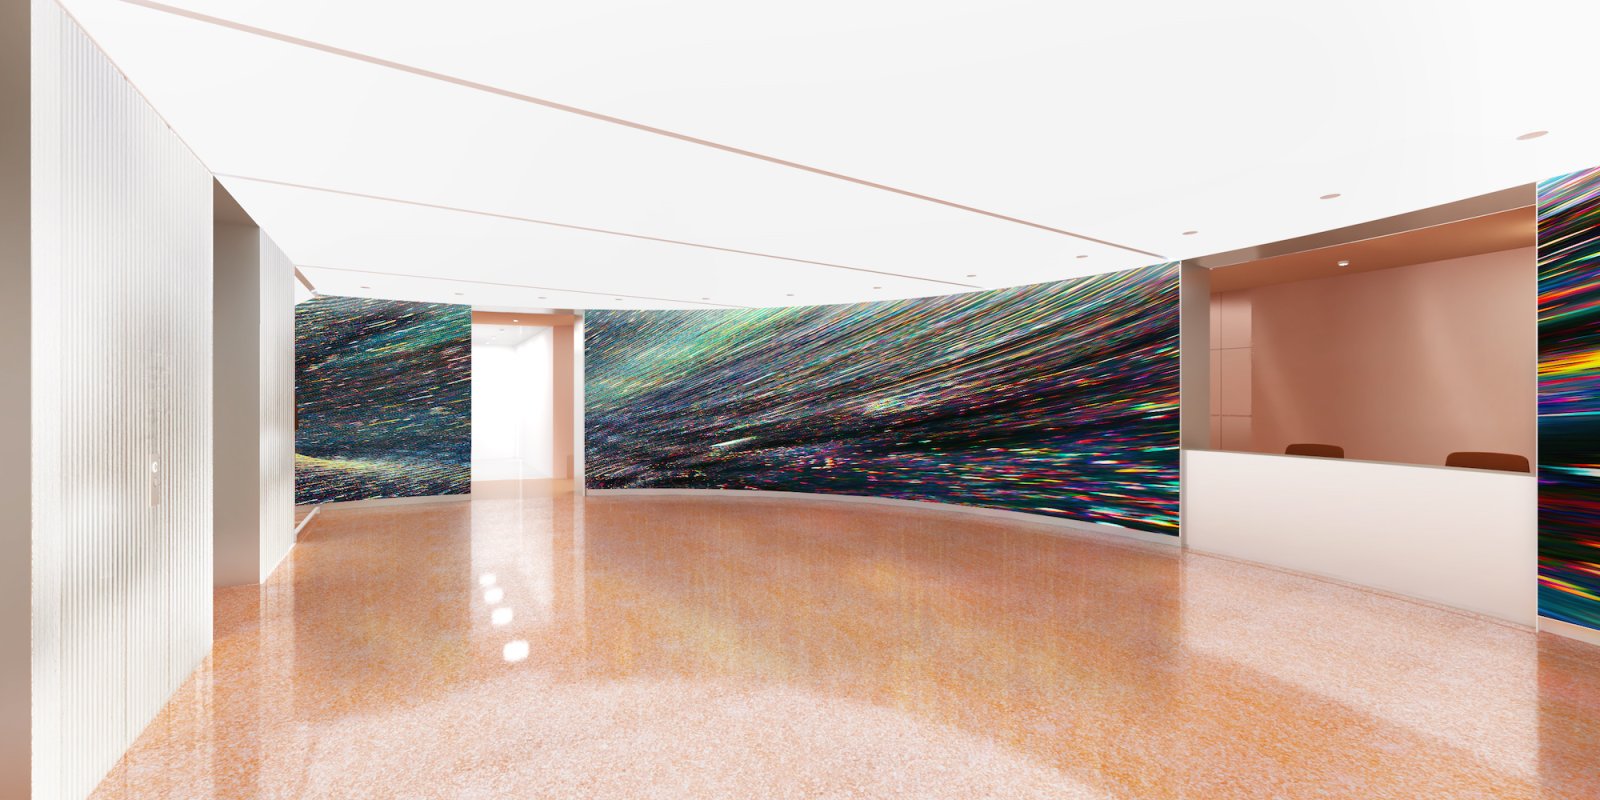 Rendering of multicolored tapestry lining a curved wall in a gallery space 